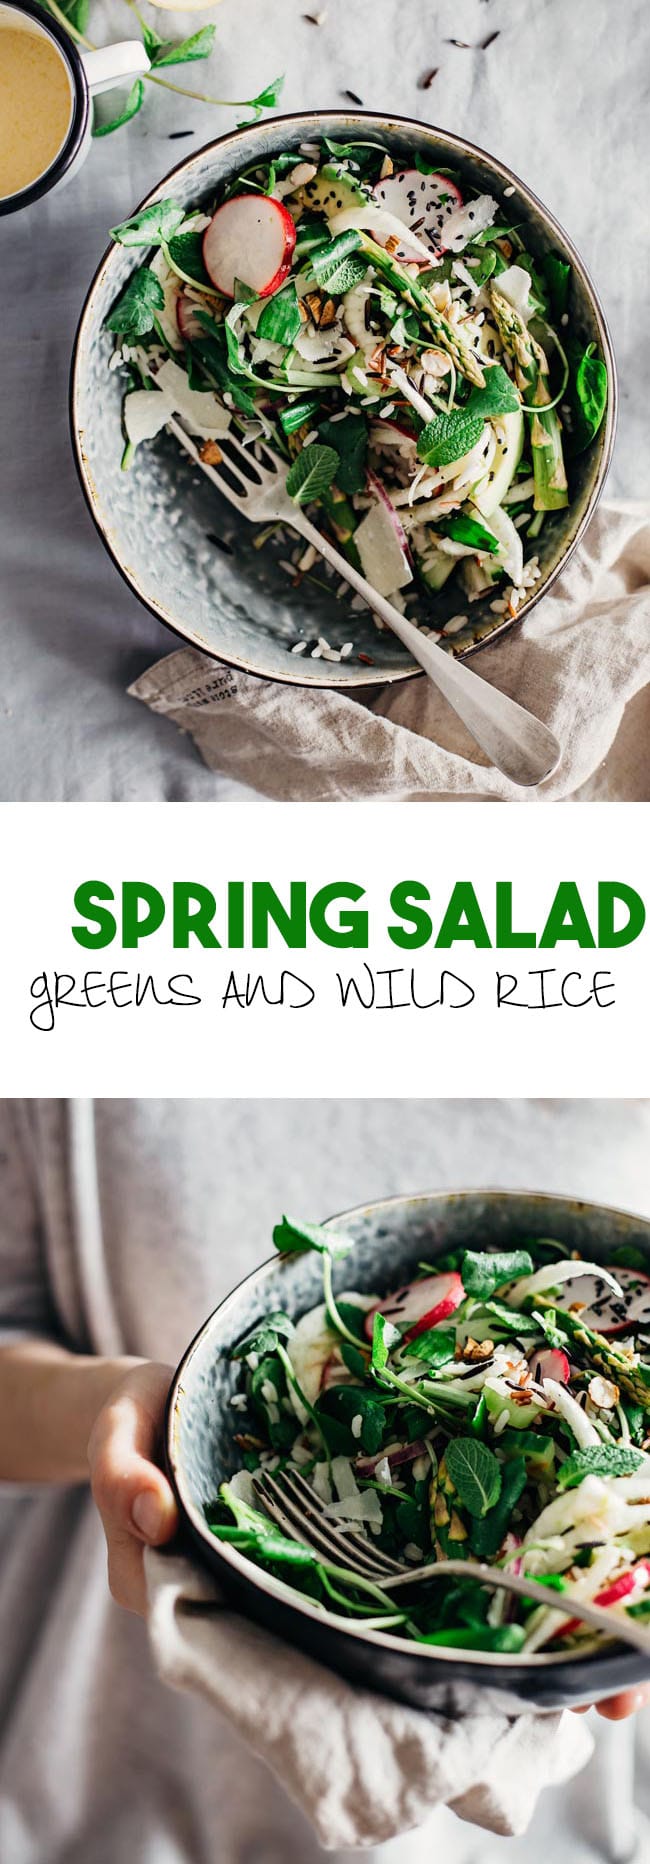 Spring salad with fresh greens, herbs and wild rice, for a detox lunch | TheAwesomeGreen.com